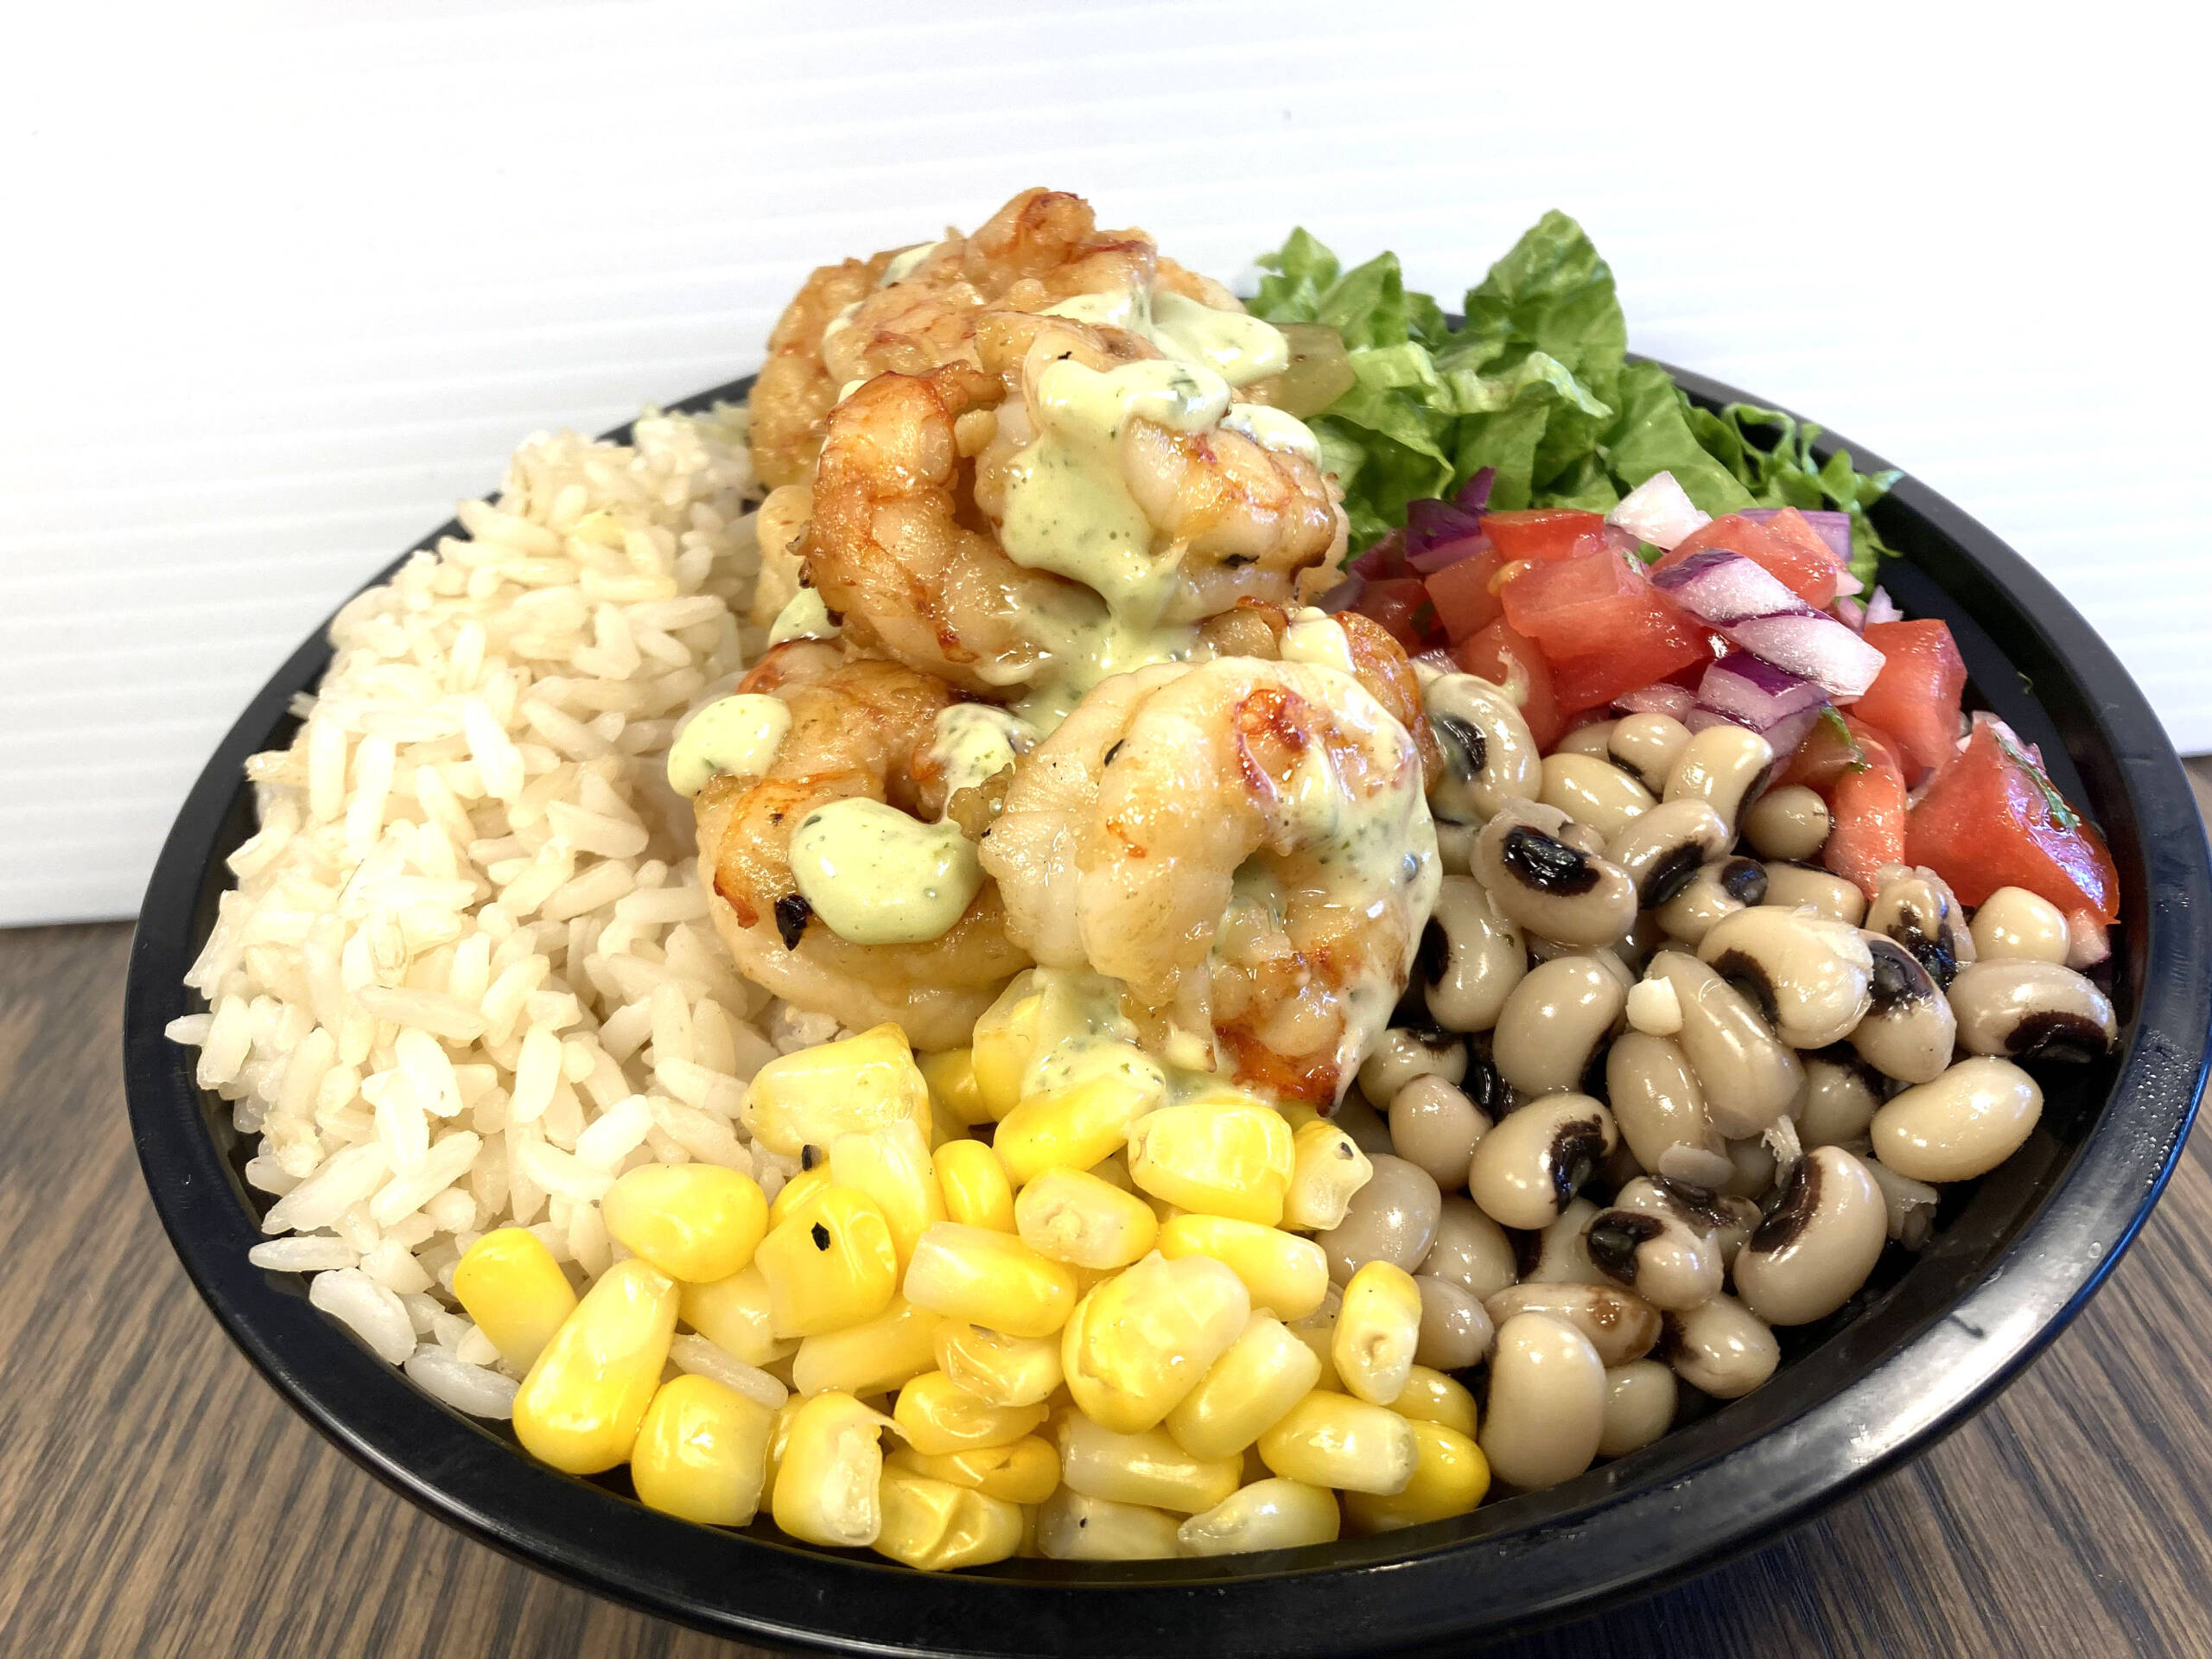 Grilled shrimp bowl served with Mediterranean Rice, Romaine Lettuce, Corn, Black Eyed Beans, Diced Tomato, Diced Red Onions, Cilantro, and Fresh Herb & Cream Sauce